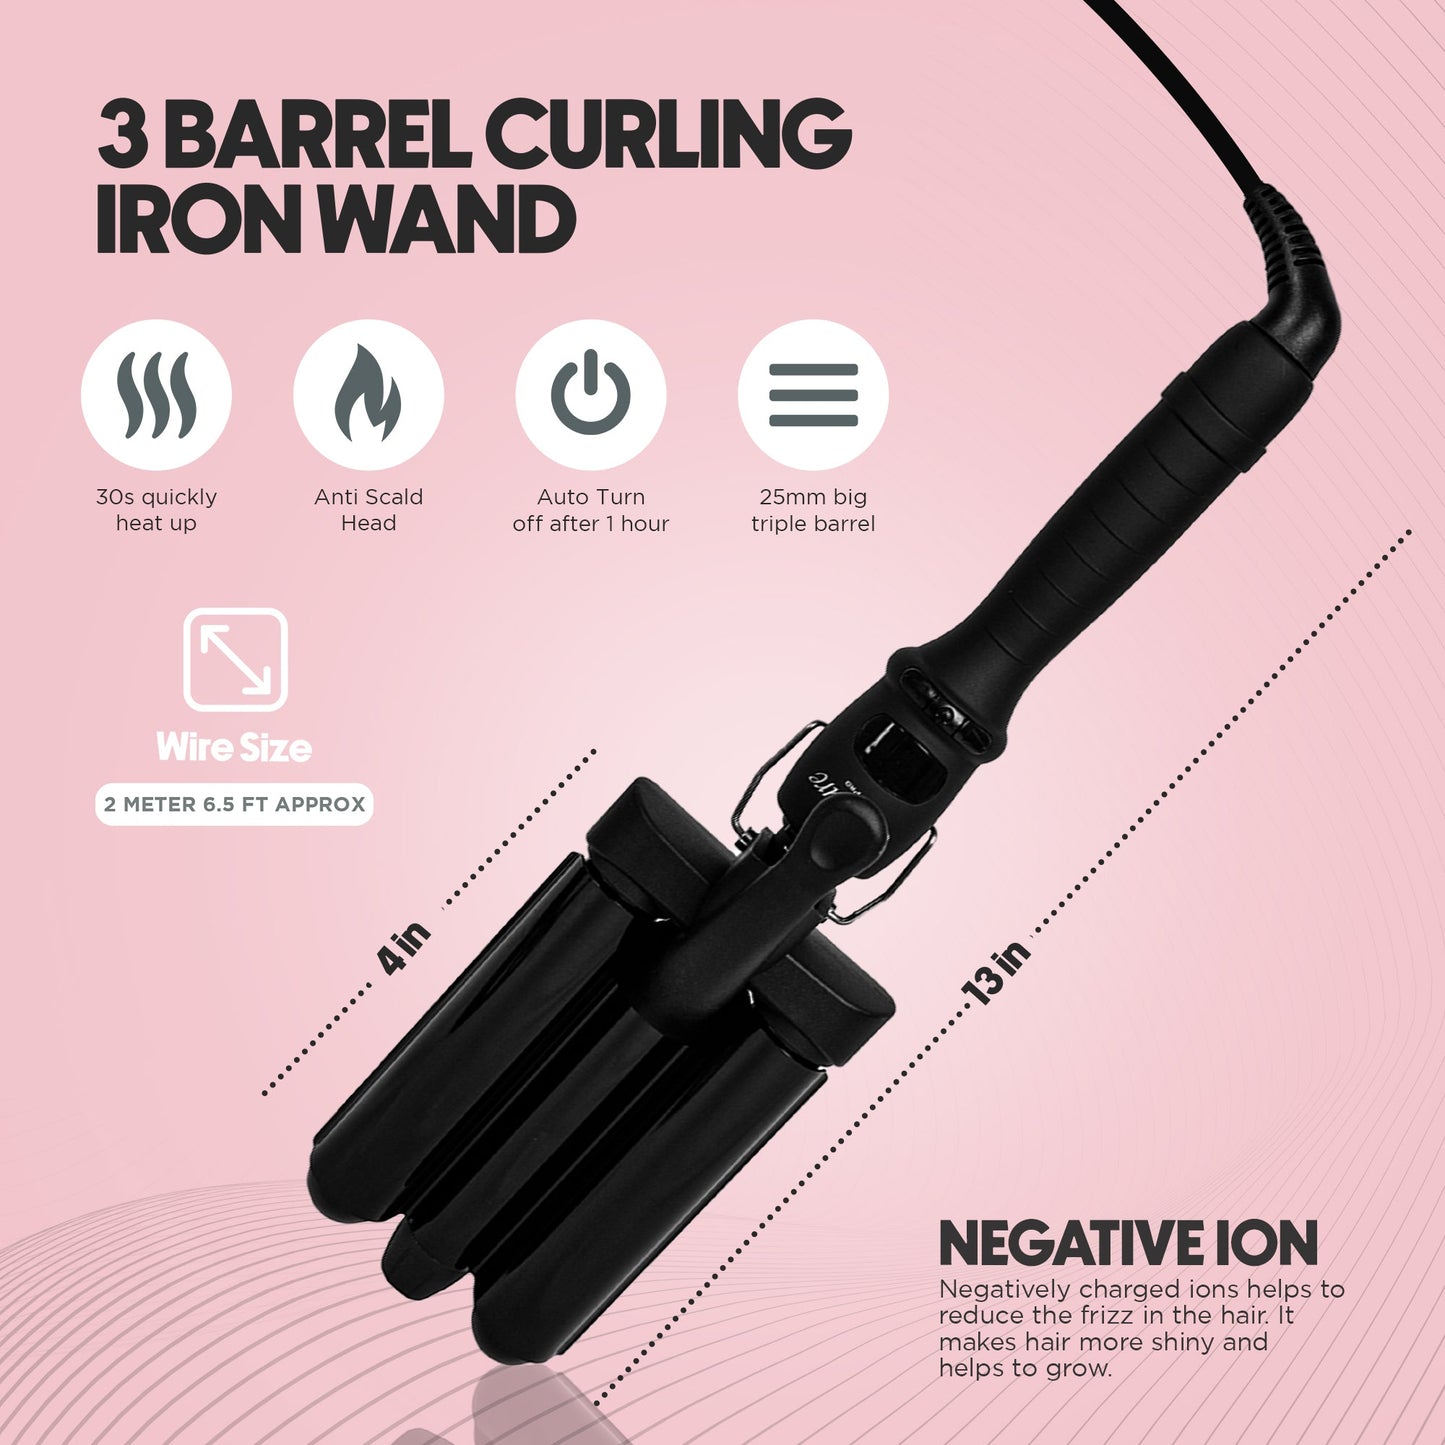 Couture Hair Pro Wave Styler - Deep Waves- Bed Head Wave Styler - Couture Hair Pro